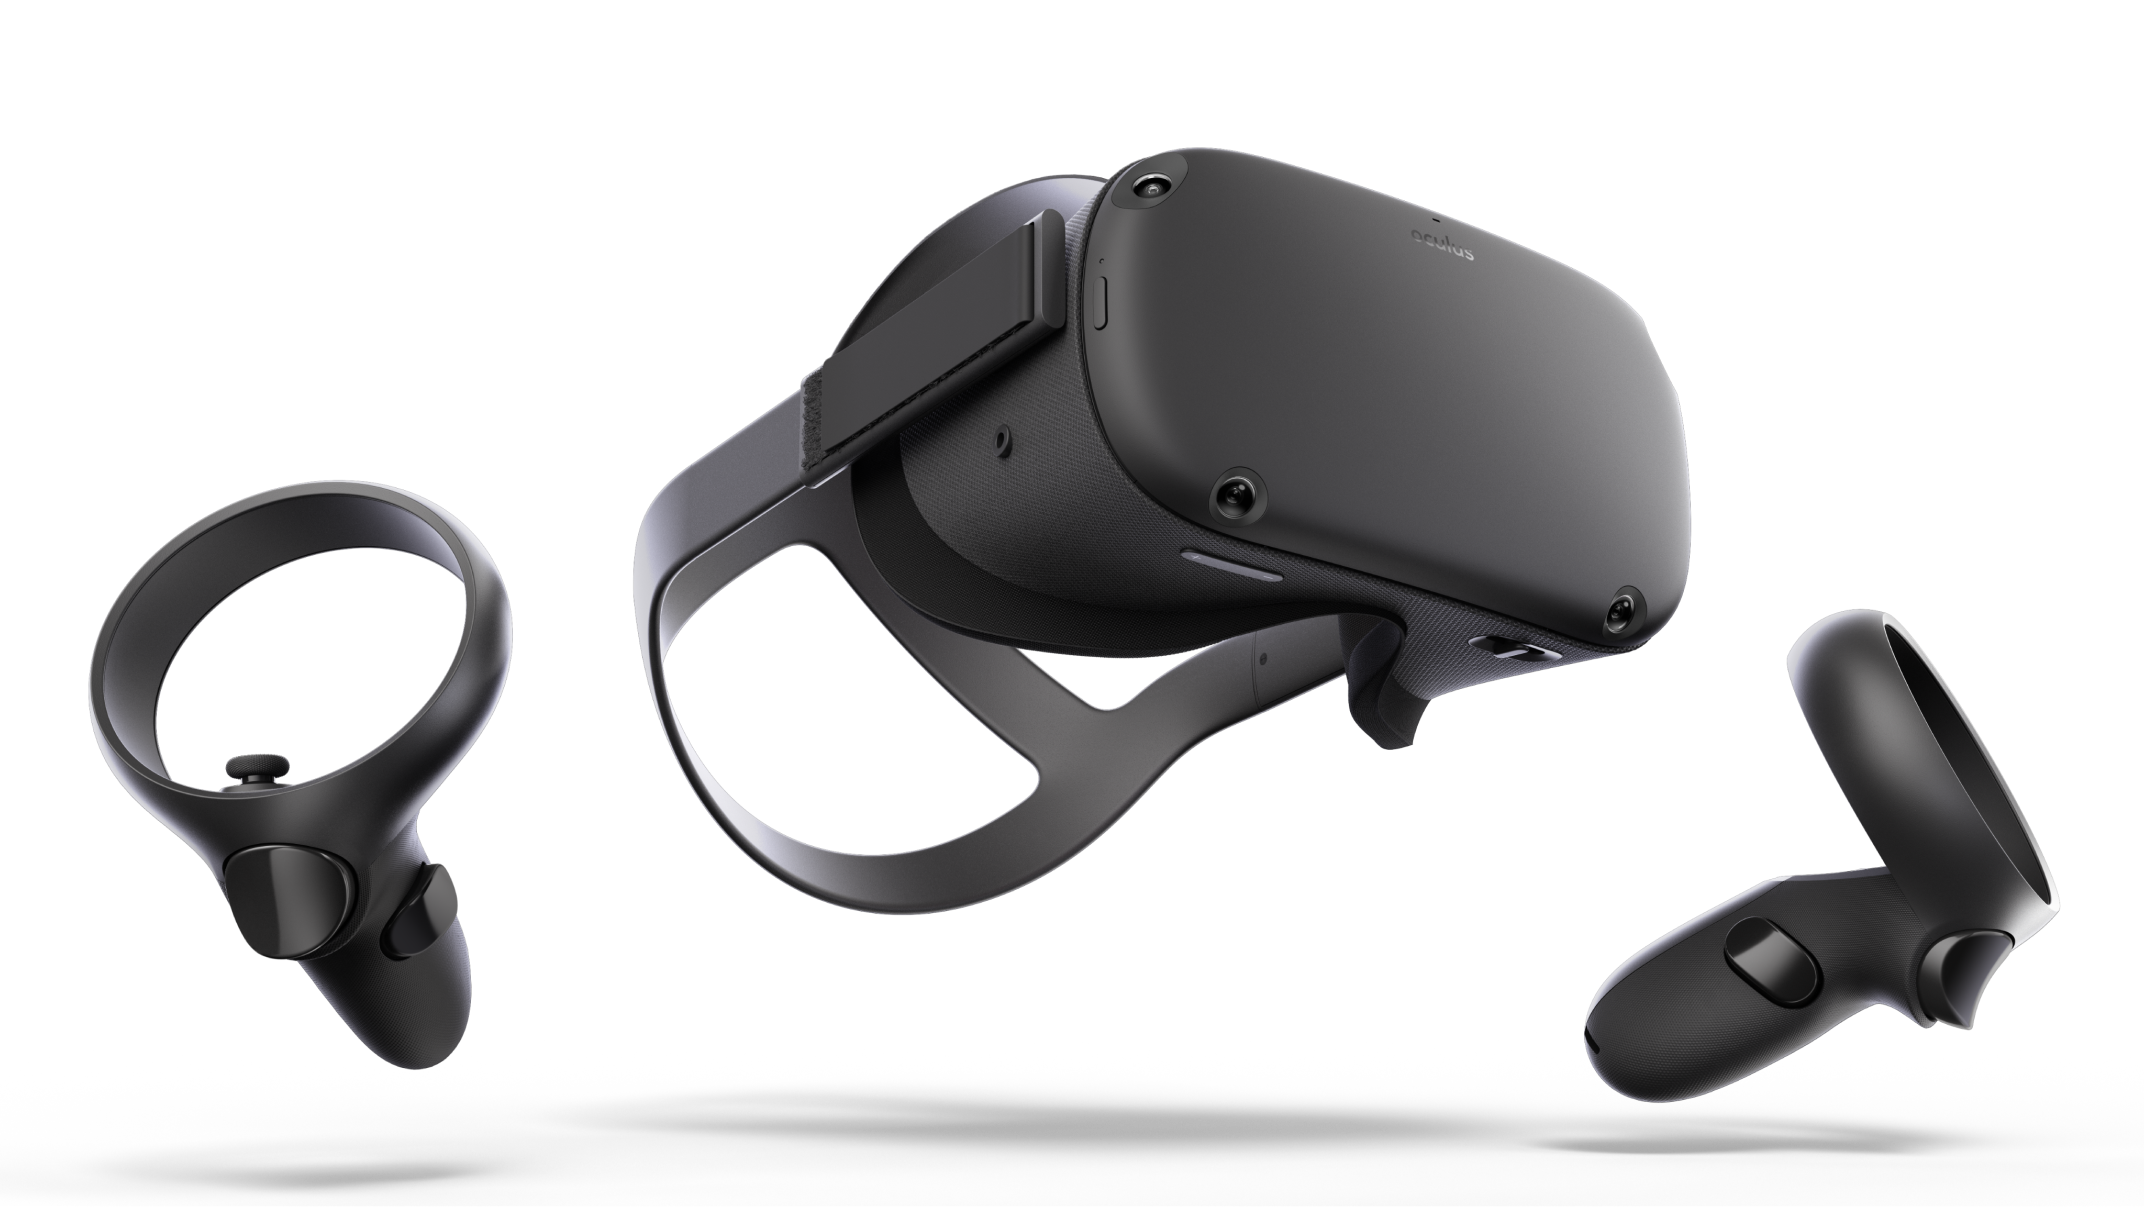 Step 3: Update the Oculus Quest firmware
Step 4: Clear cache and data for the Oculus Quest app